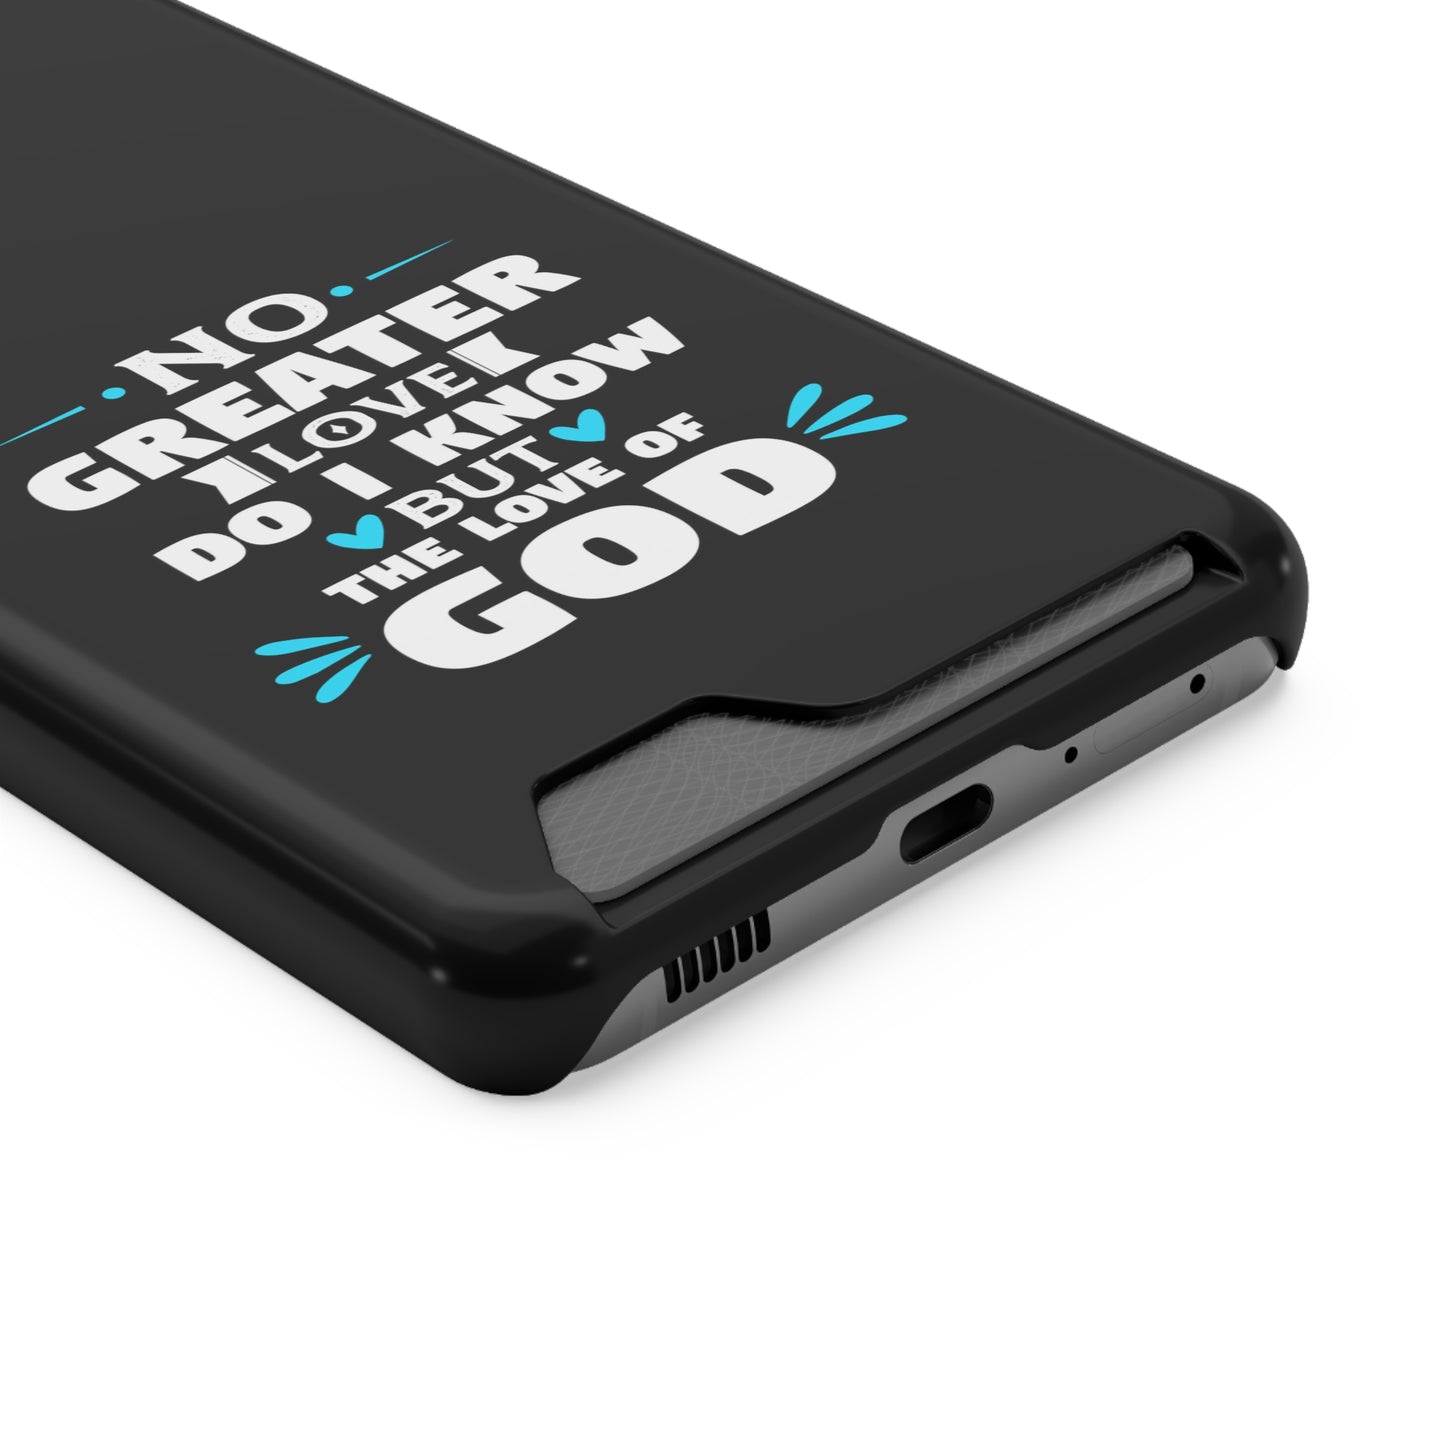 No Greater Love Do I Know But The Love Of God  Phone Case With Card Holder